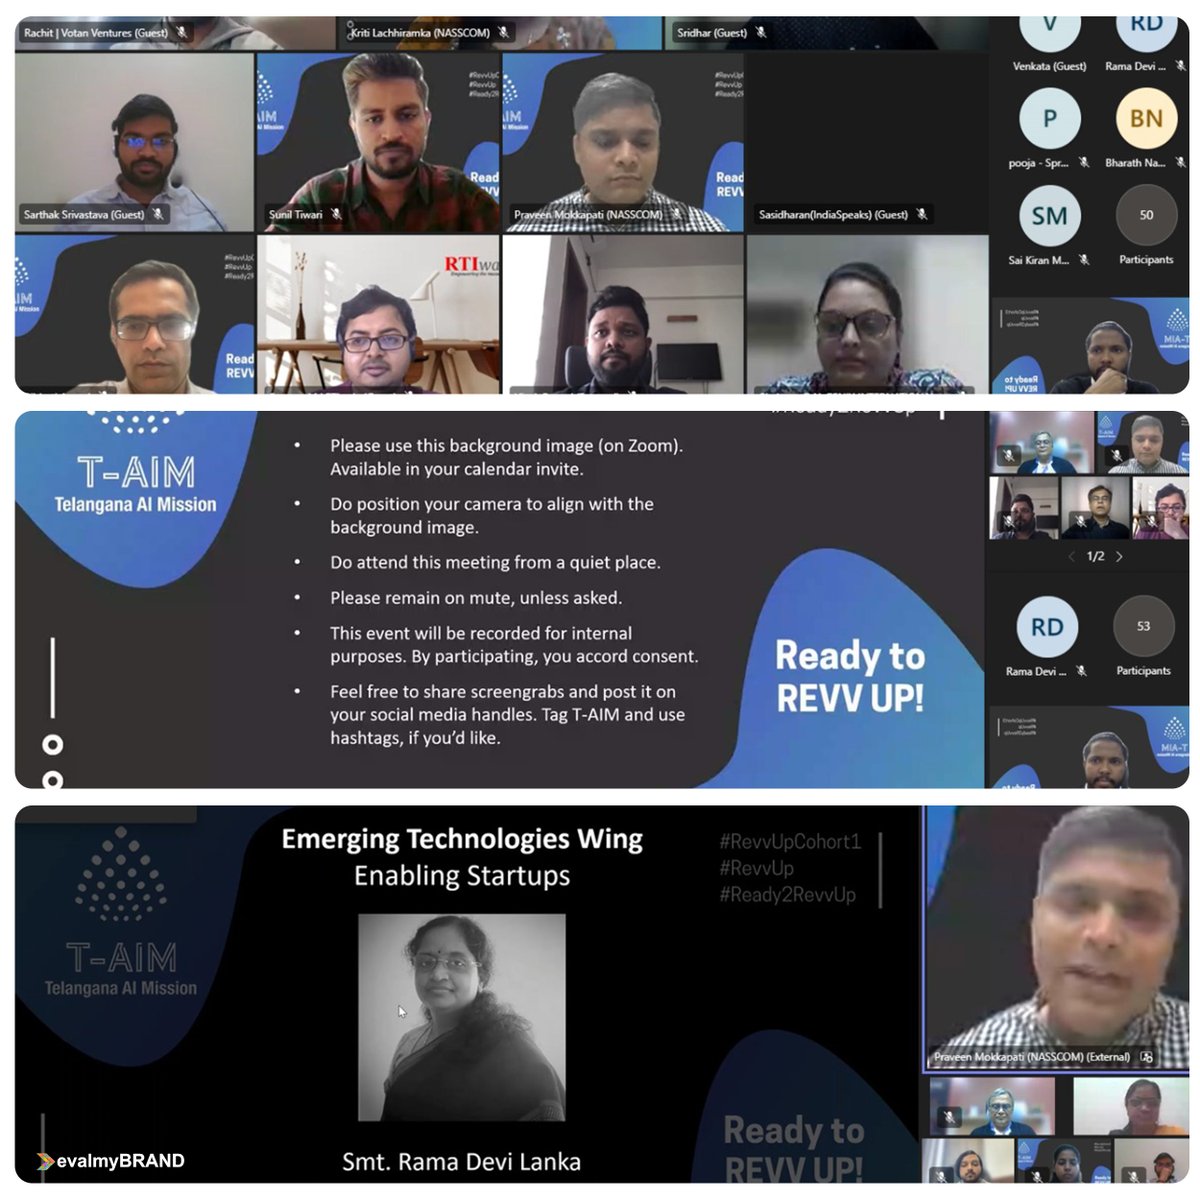 An interactive and exciting session by #T-AIM's #RevvUp Acceleration Program Team could not have been better!
We thank @RamaDeviLanka, @Ankitbose from #NASSCOM, and @Praveenmokkapati for welcoming and addressing us.

#artificialintelligence #socaillistening #socialmedia